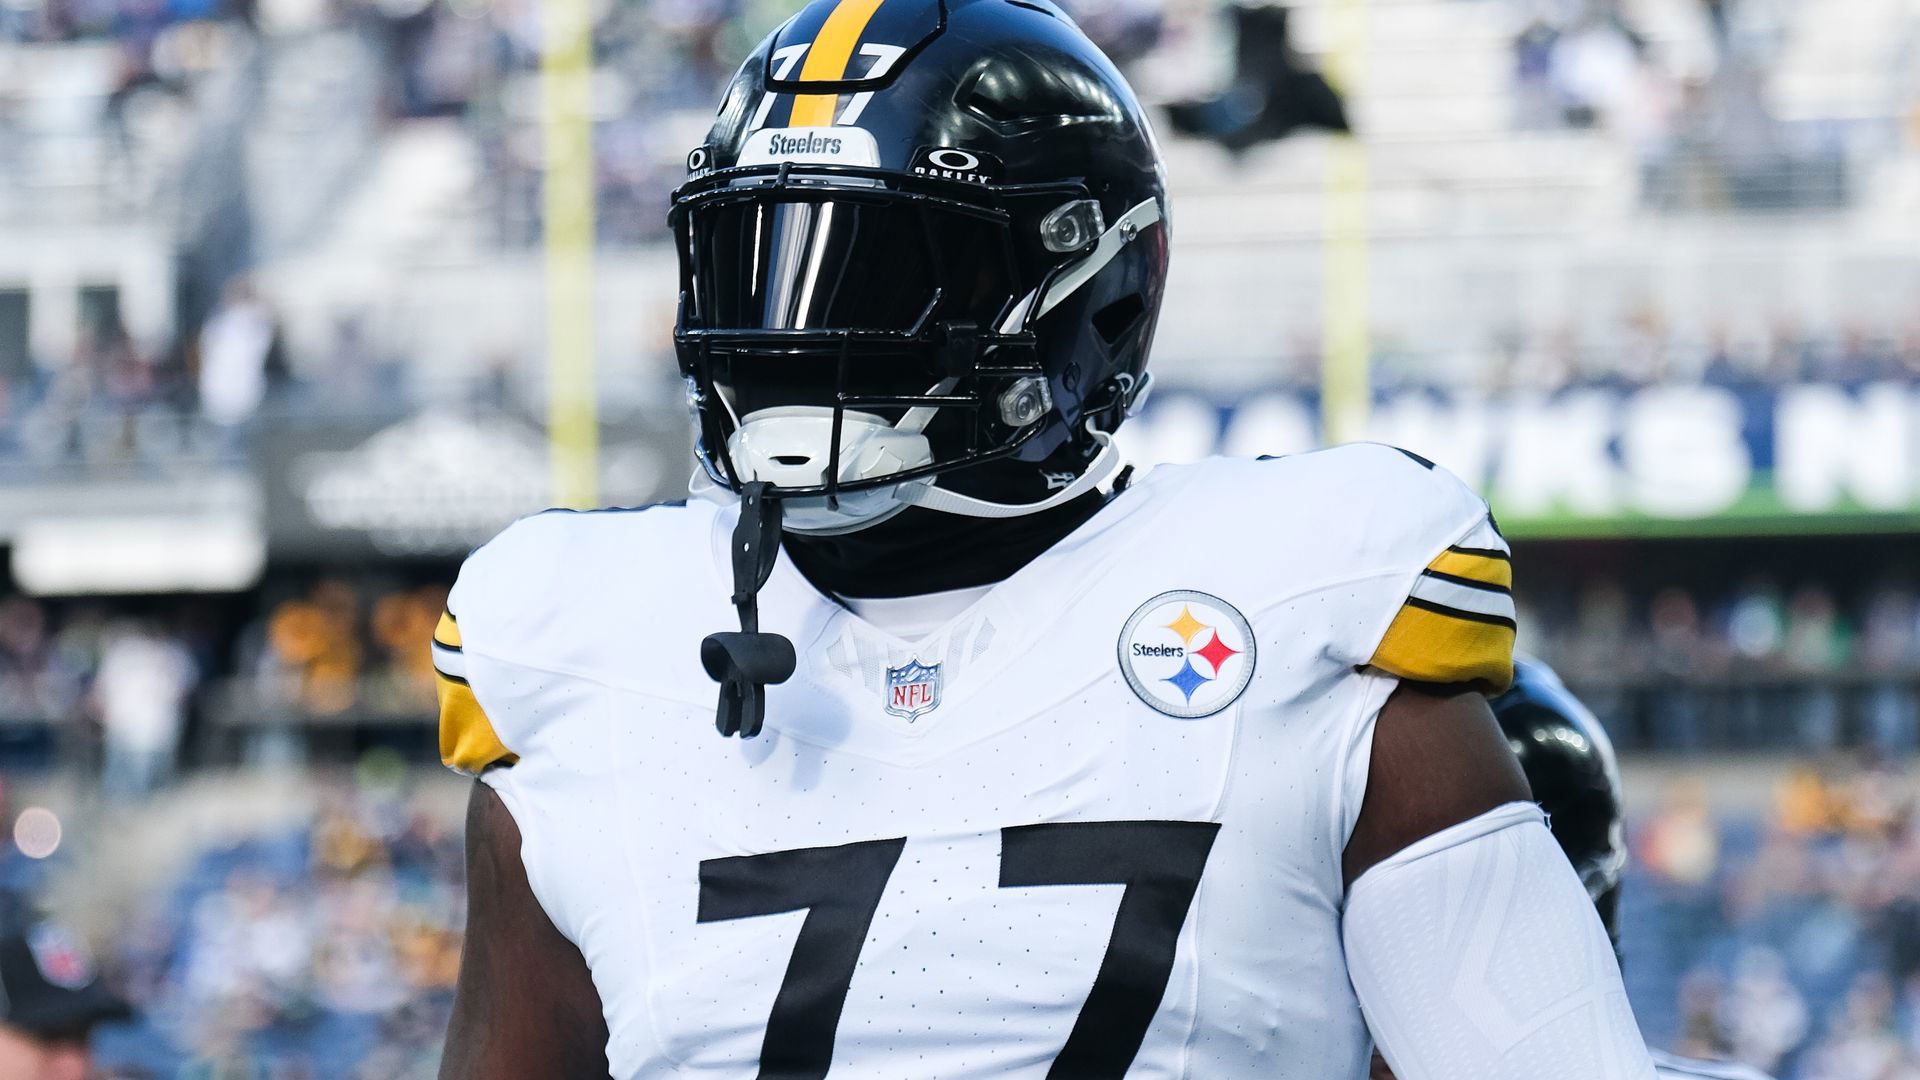 Steelers Reacts Results Steelers fans hoping for OL in Round 1 of the